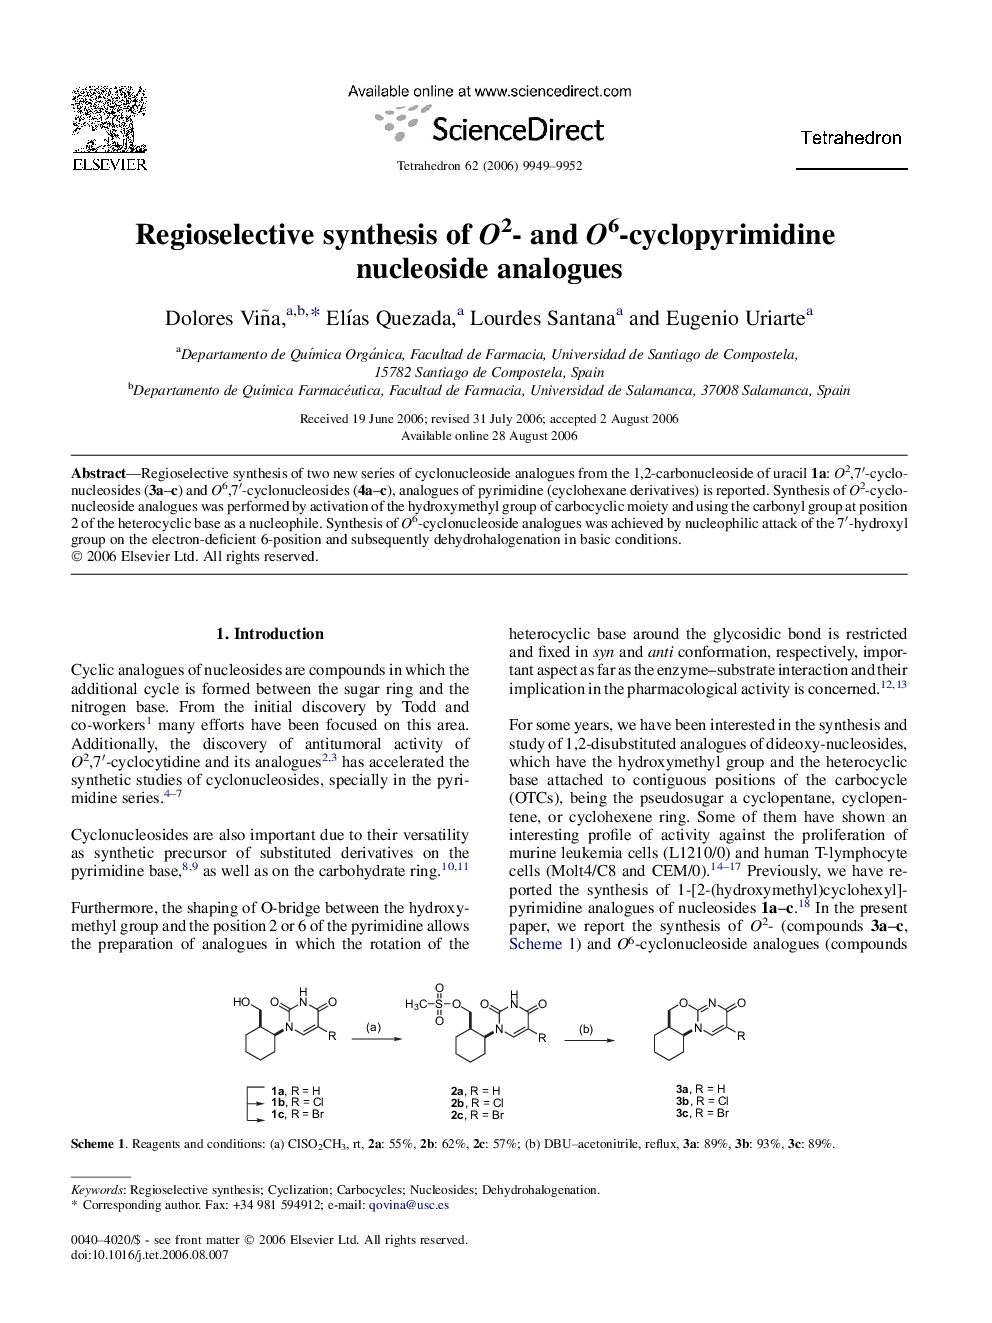 Regioselective synthesis of O2- and O6-cyclopyrimidine nucleoside analogues